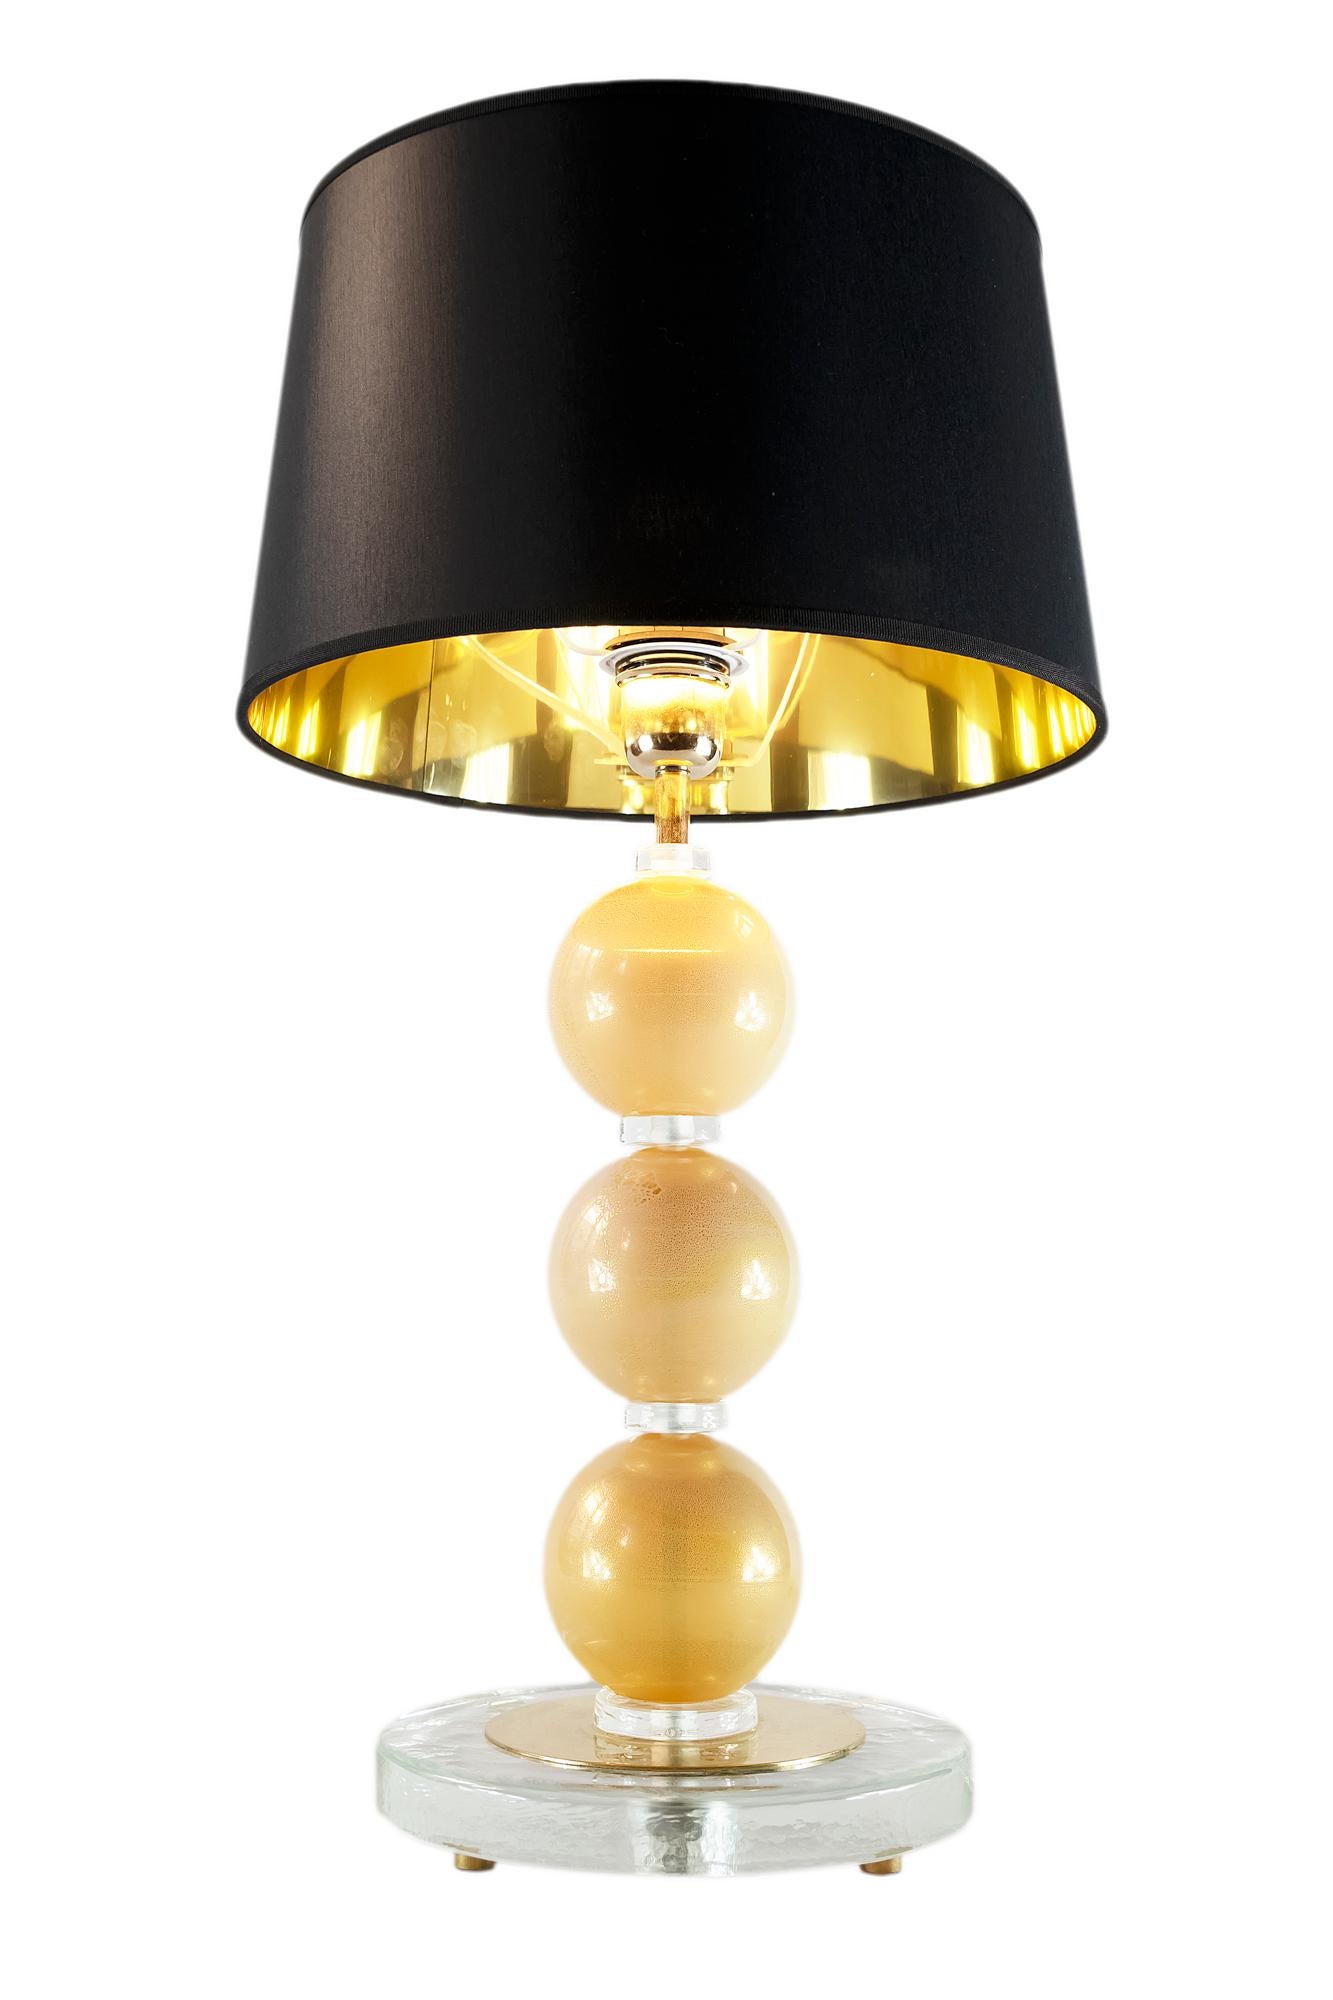 This pair of Italian table lamps are designed in Murano glass.
The glass is lightly yellow with inlaid gold.
The base is made of round form thick clear glass with small round brass legs.
Both lamps are with new made satin finish black color